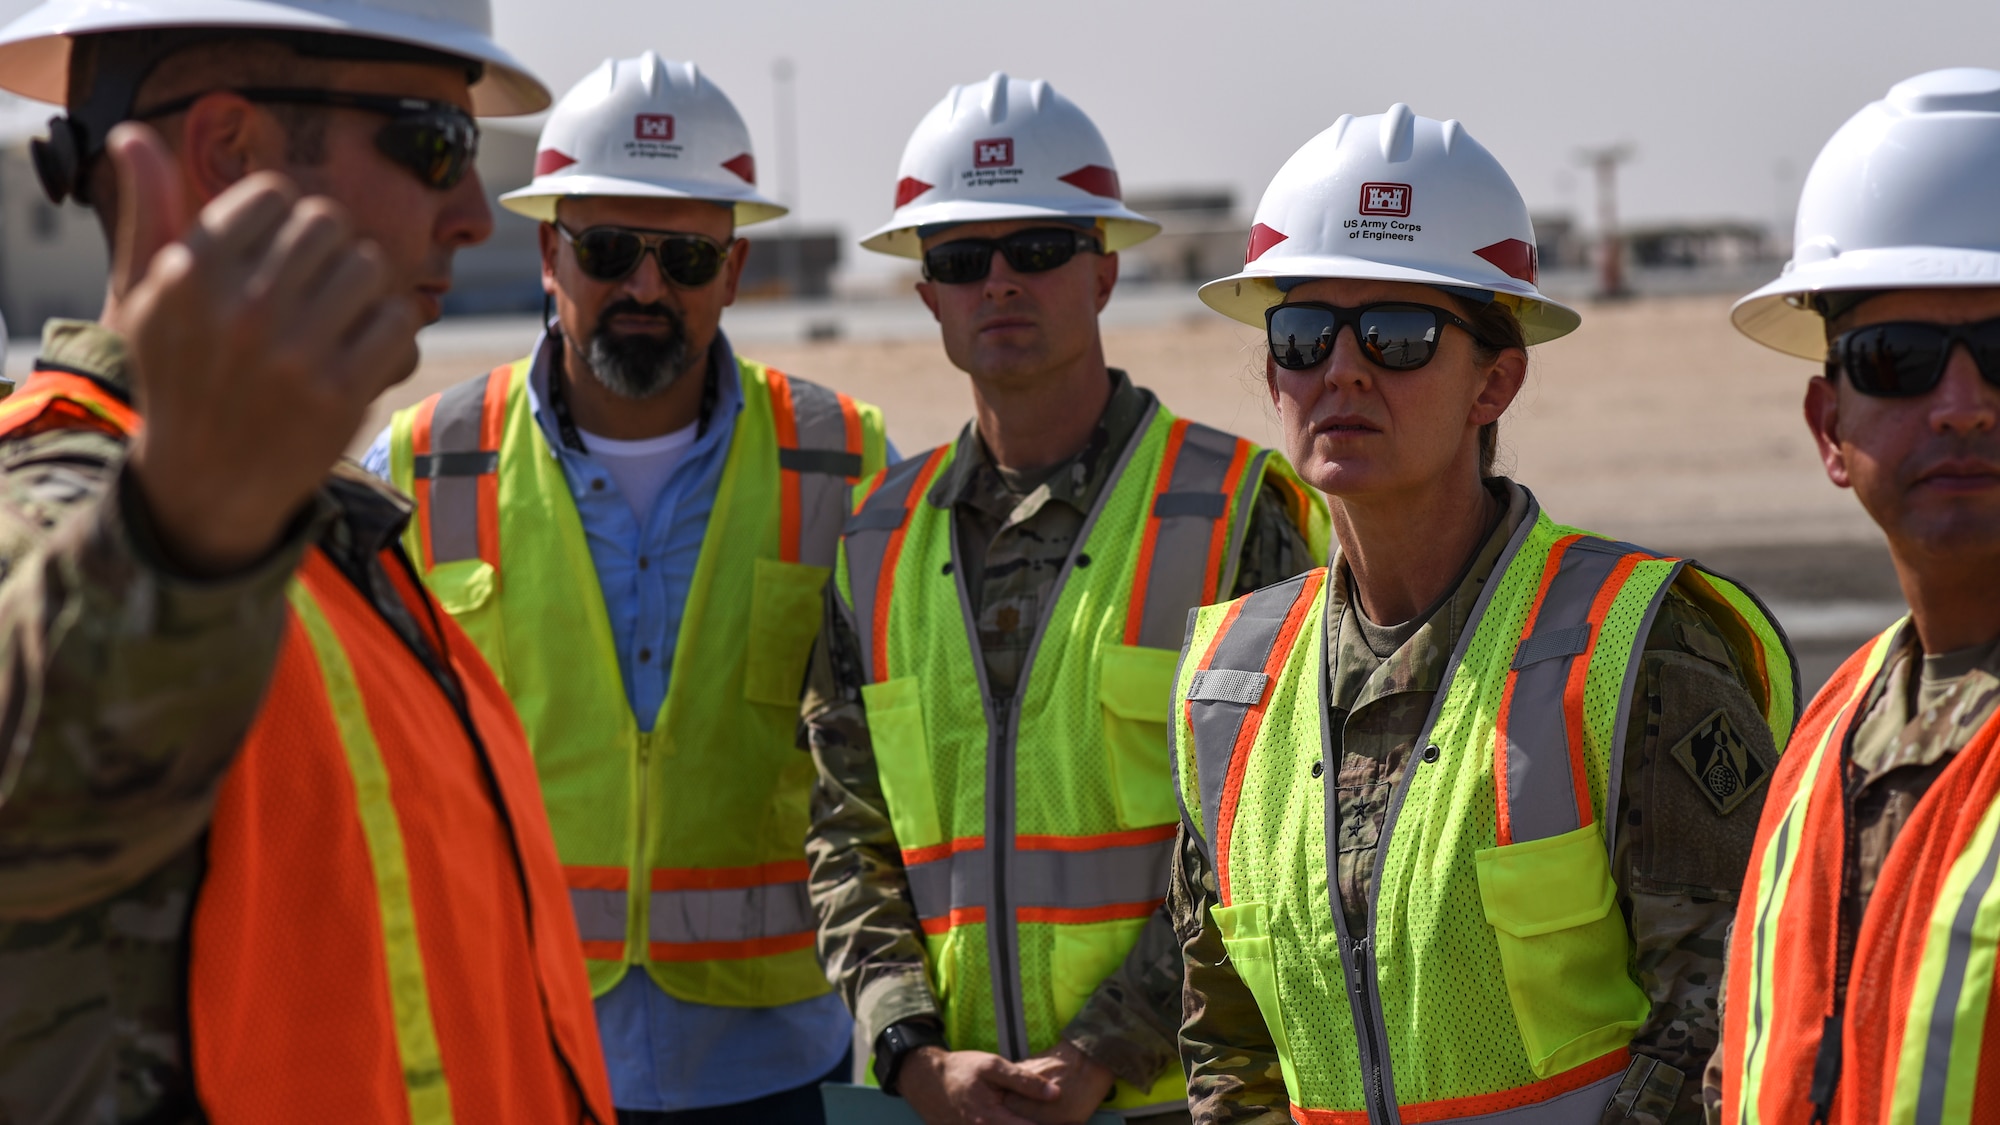 U.S. Army Maj. Gen. Kimberly Colloton, commanding general of the U.S. Army Corps of Engineers Transatlantic Division, speaks with Ali Al Salem Air Base leadership and USACE regarding the runway addition at ASAB, Kuwait, Oct. 21, 2021. The 386th Air Expeditionary Wing constantly improves its combat capabilities and readiness. (U.S. Air Force photo by Staff Sgt. Ryan Brooks)